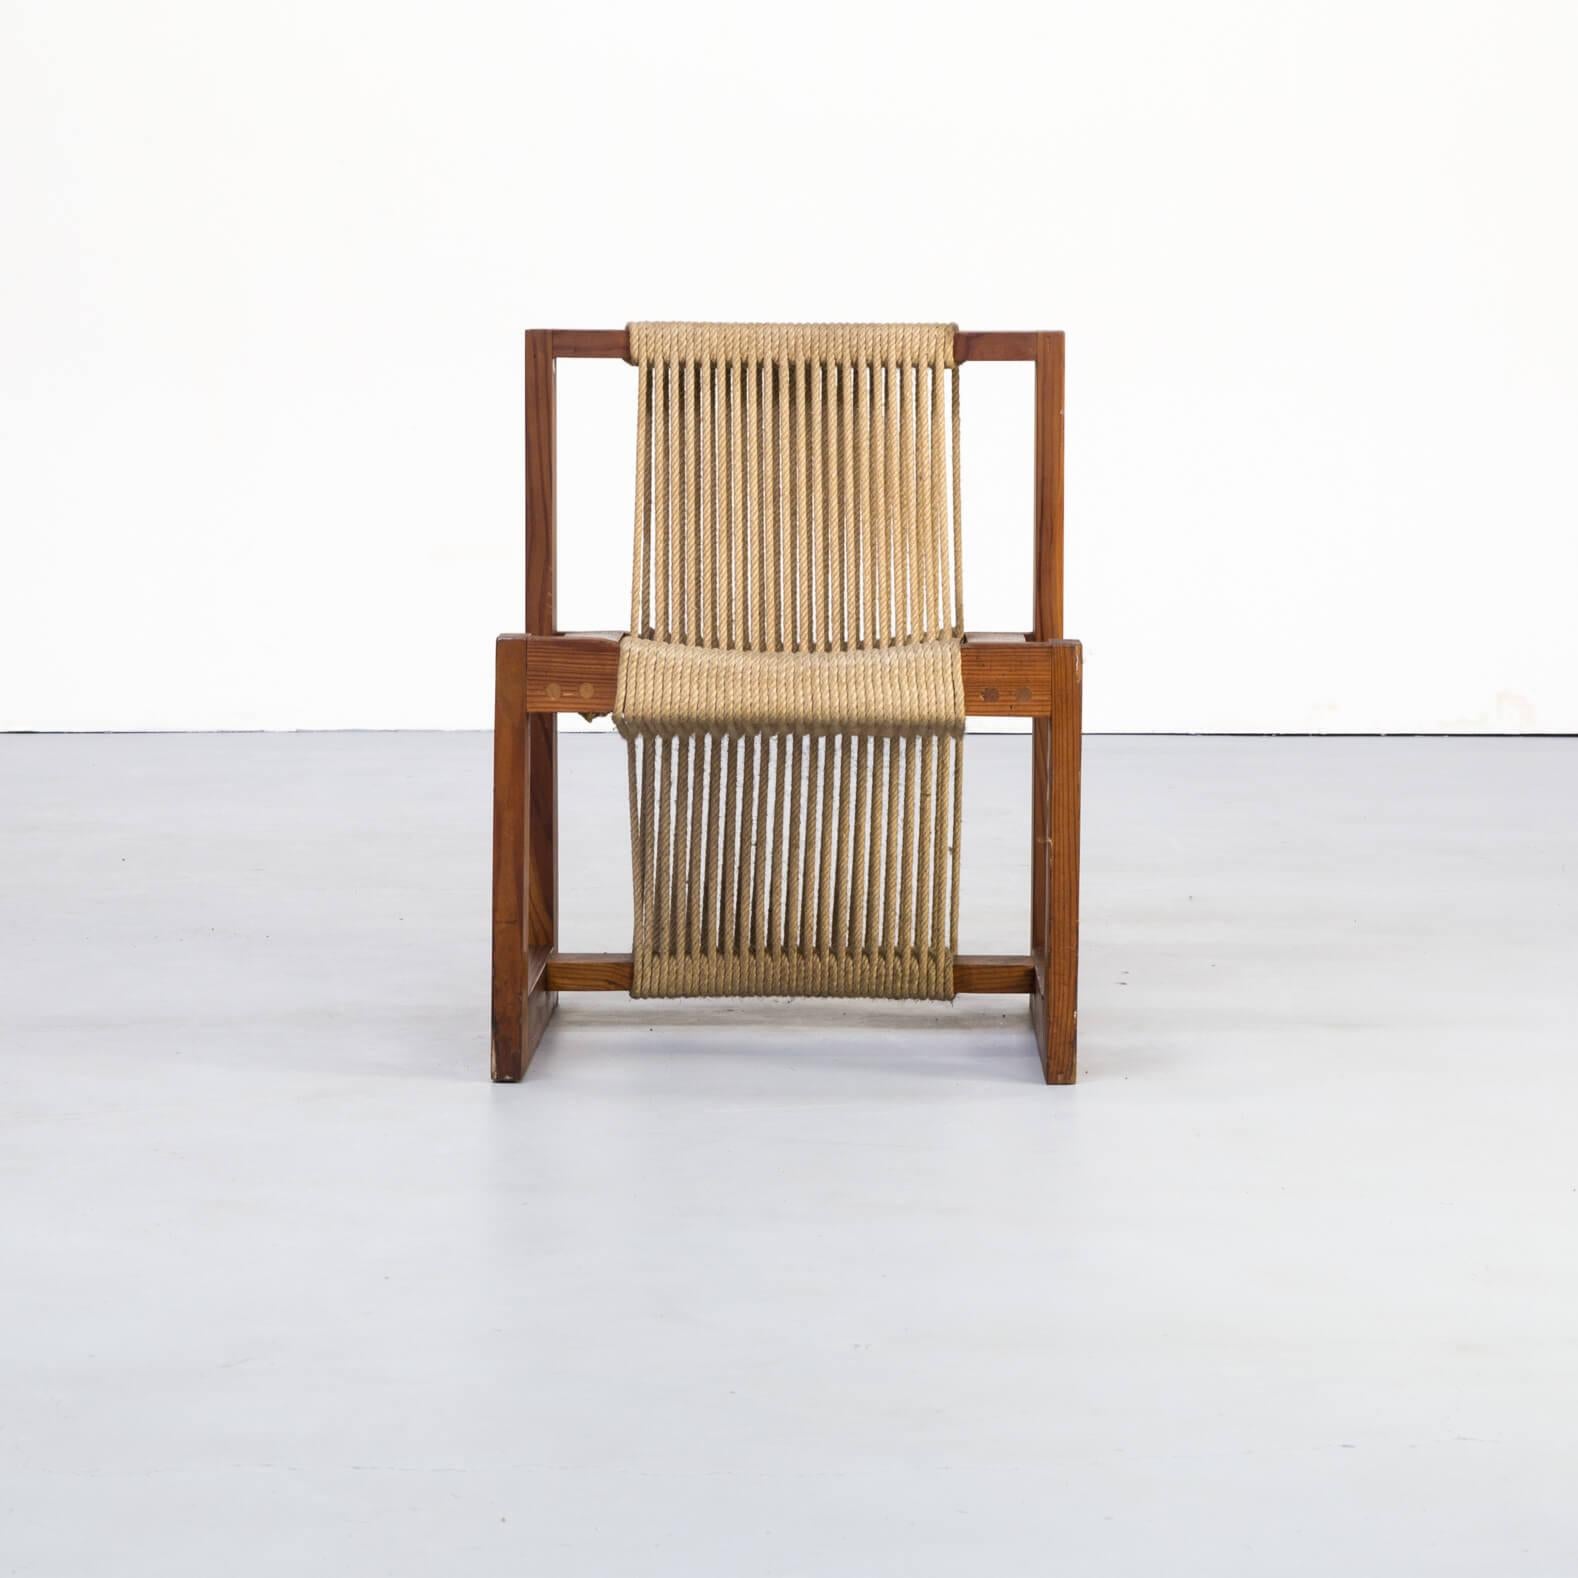 1950s rope chair in pine wood. This chair of darkened pine wood and its strong square looks would be attributed to Scandinavian designers, with a lot of high quality in the used design. Chair is in good condition consistent with age and use.